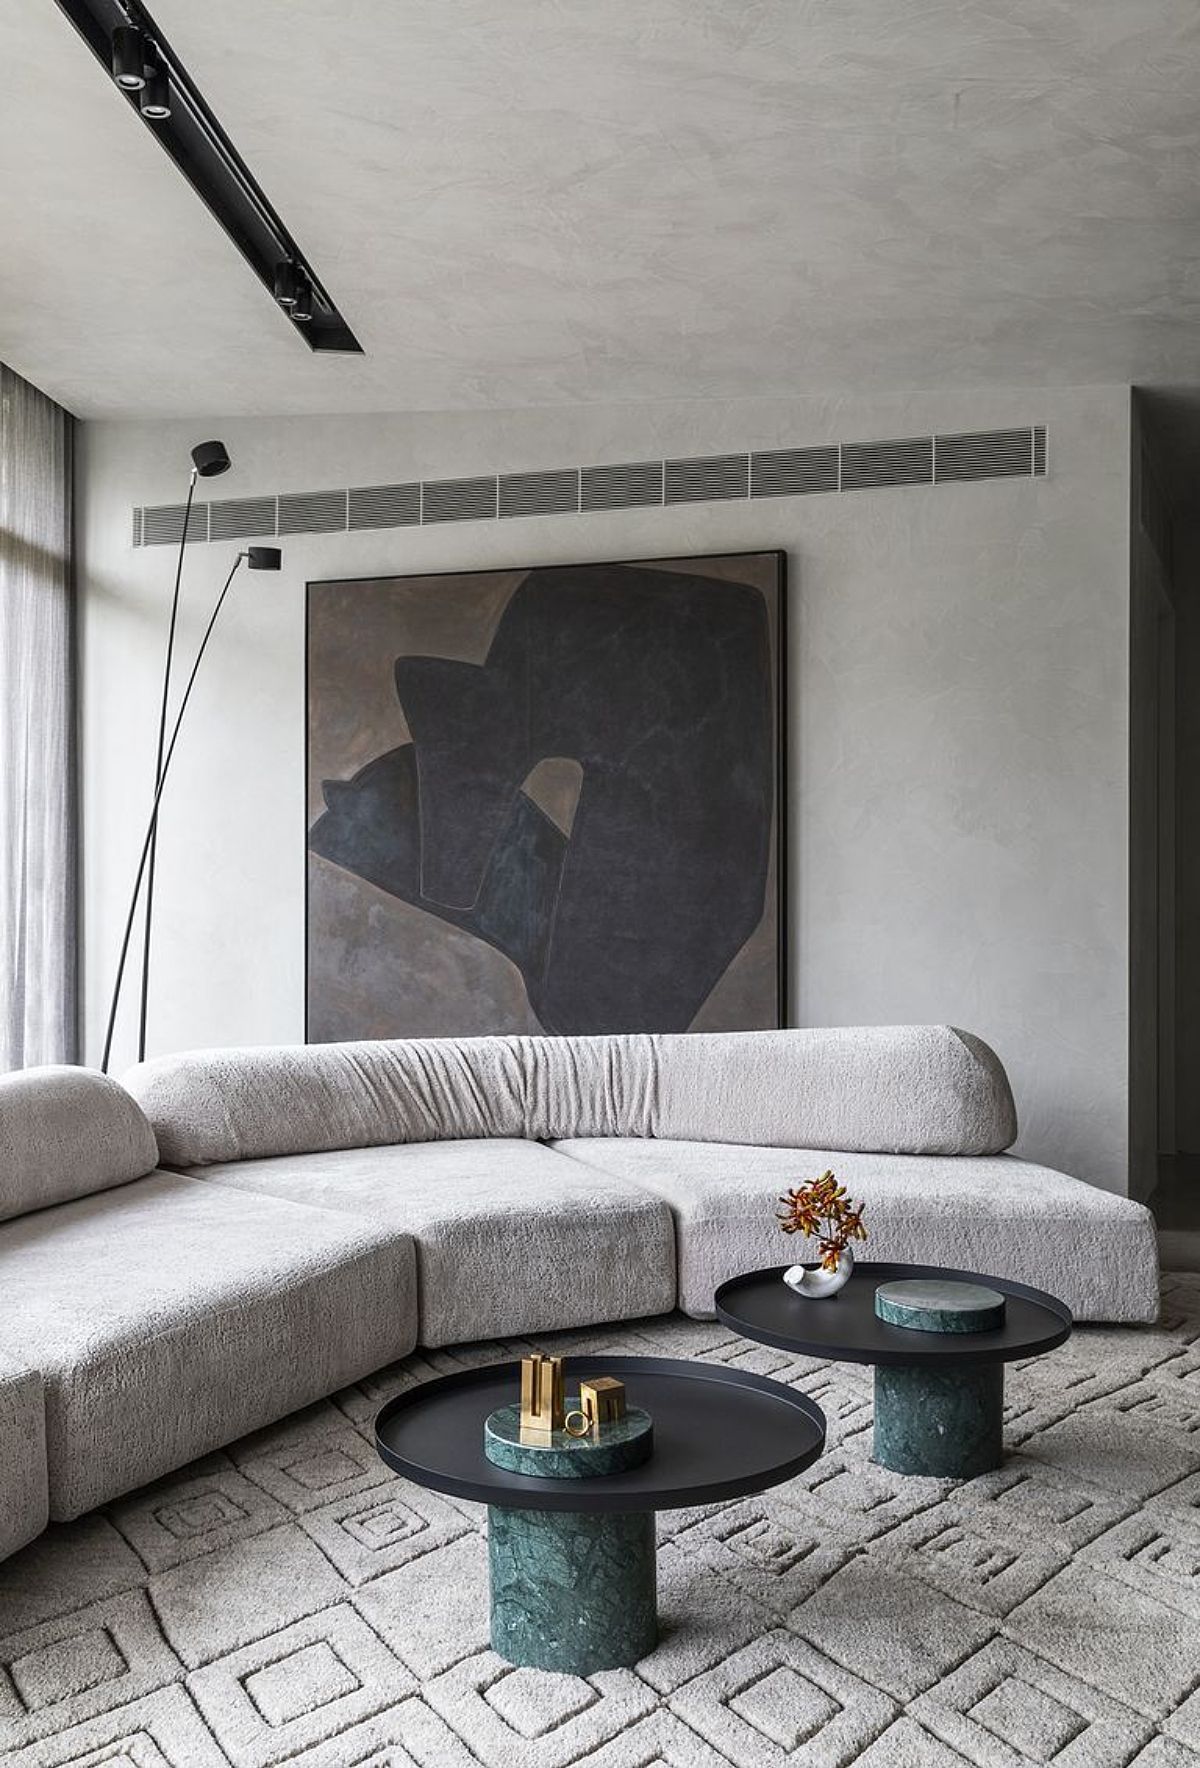 On The Rocks Sofa - Arch By Chelsea Hing - Photo By Rhiannon Taylor